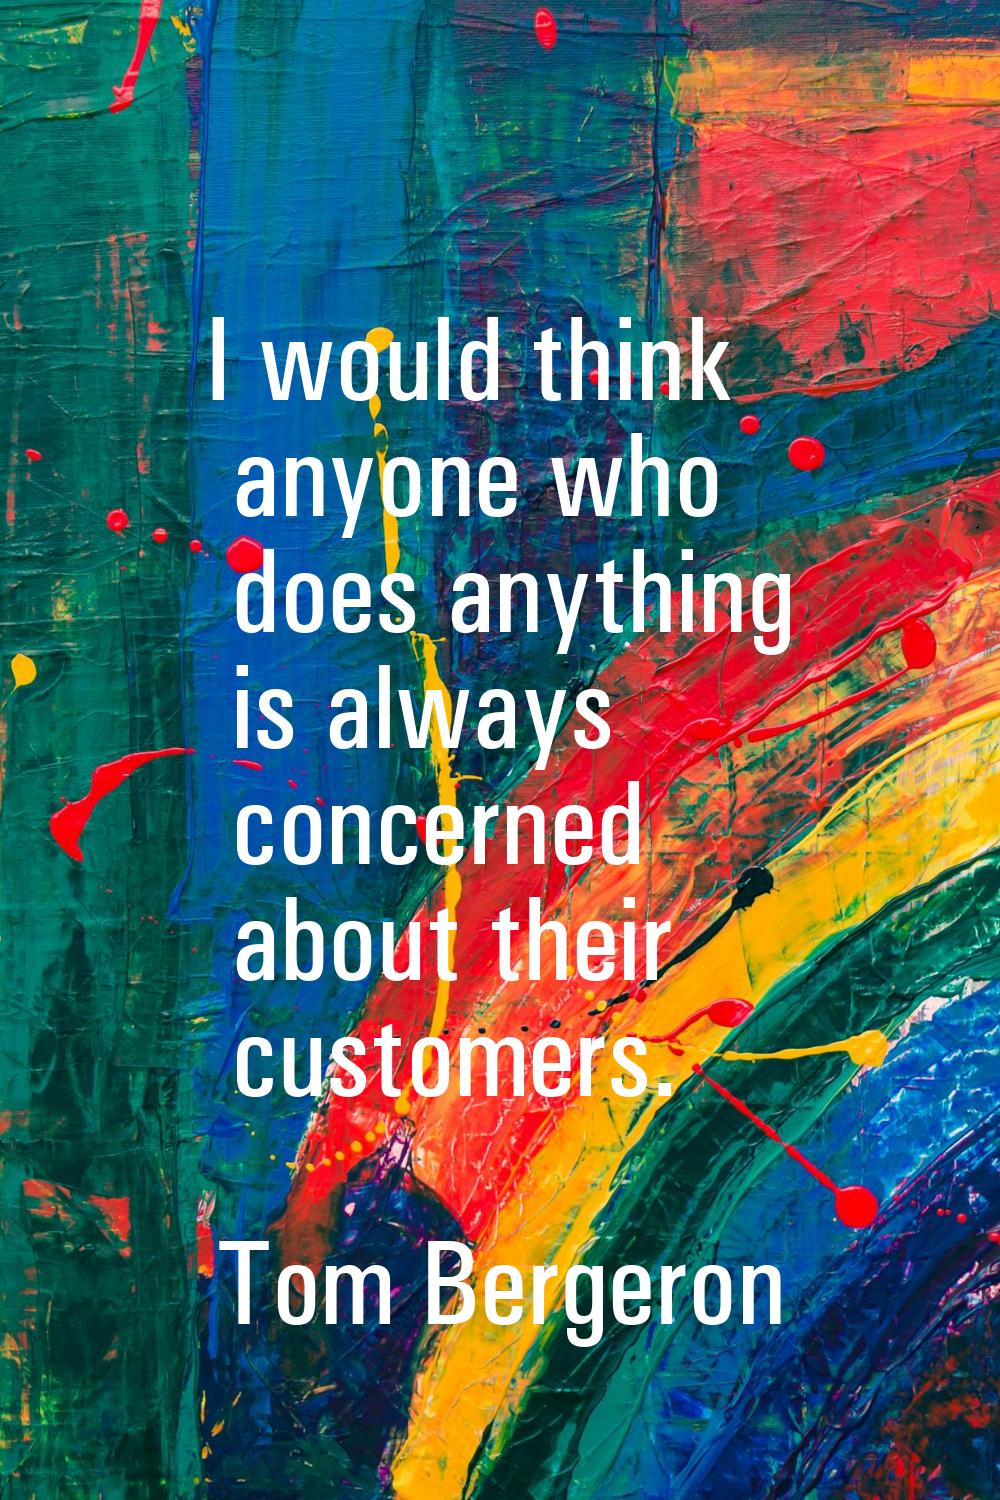 I would think anyone who does anything is always concerned about their customers.